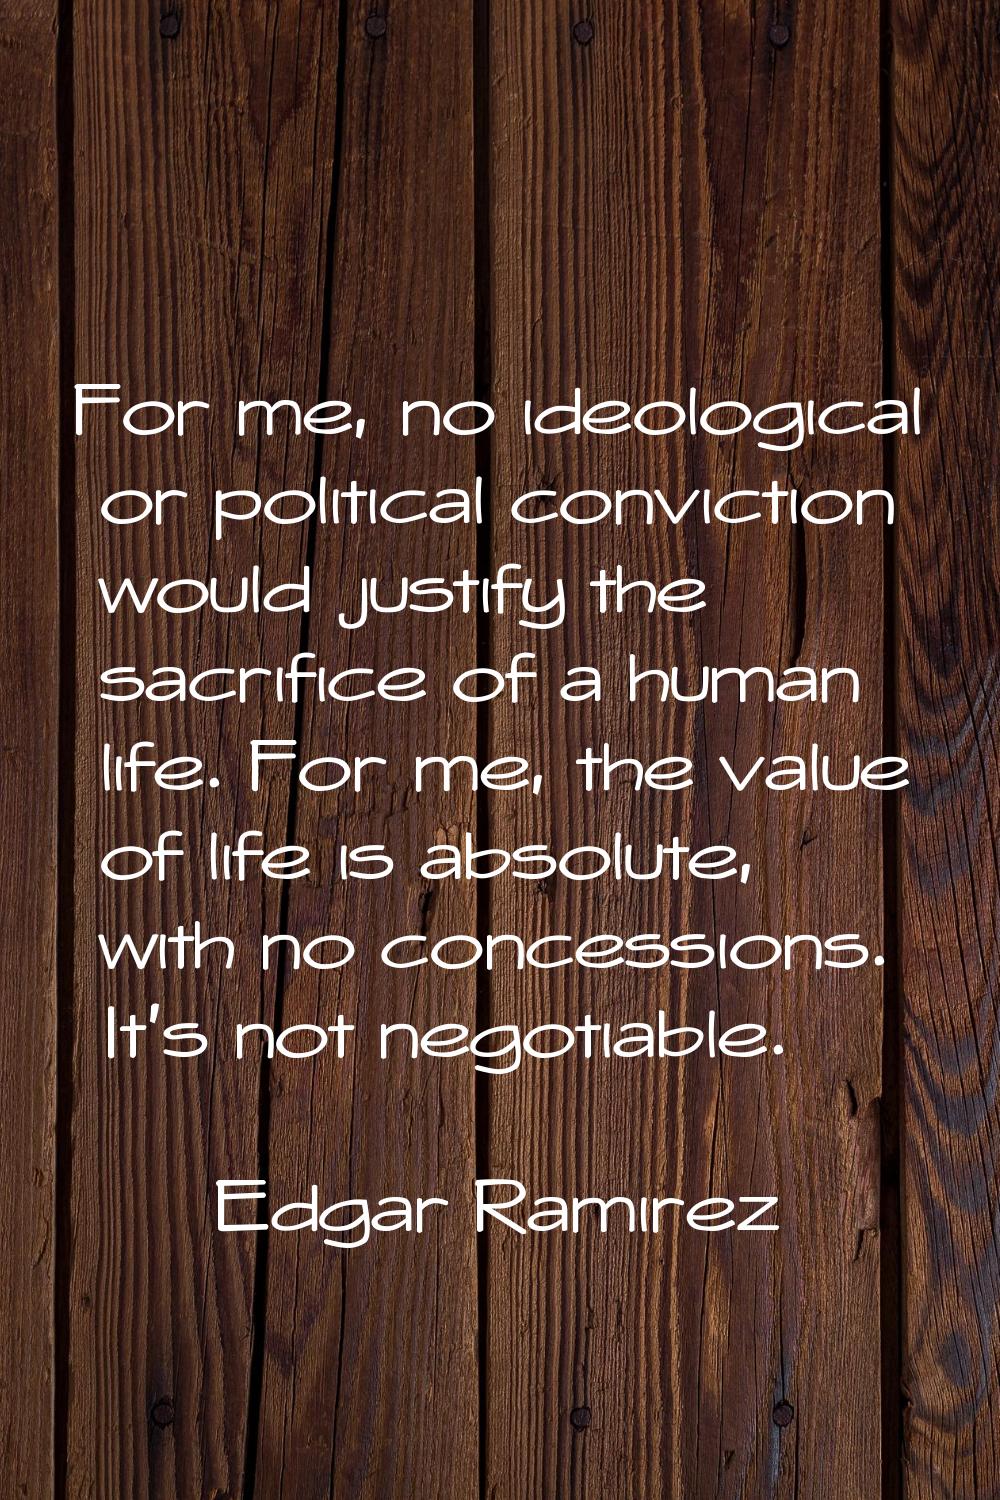 For me, no ideological or political conviction would justify the sacrifice of a human life. For me,